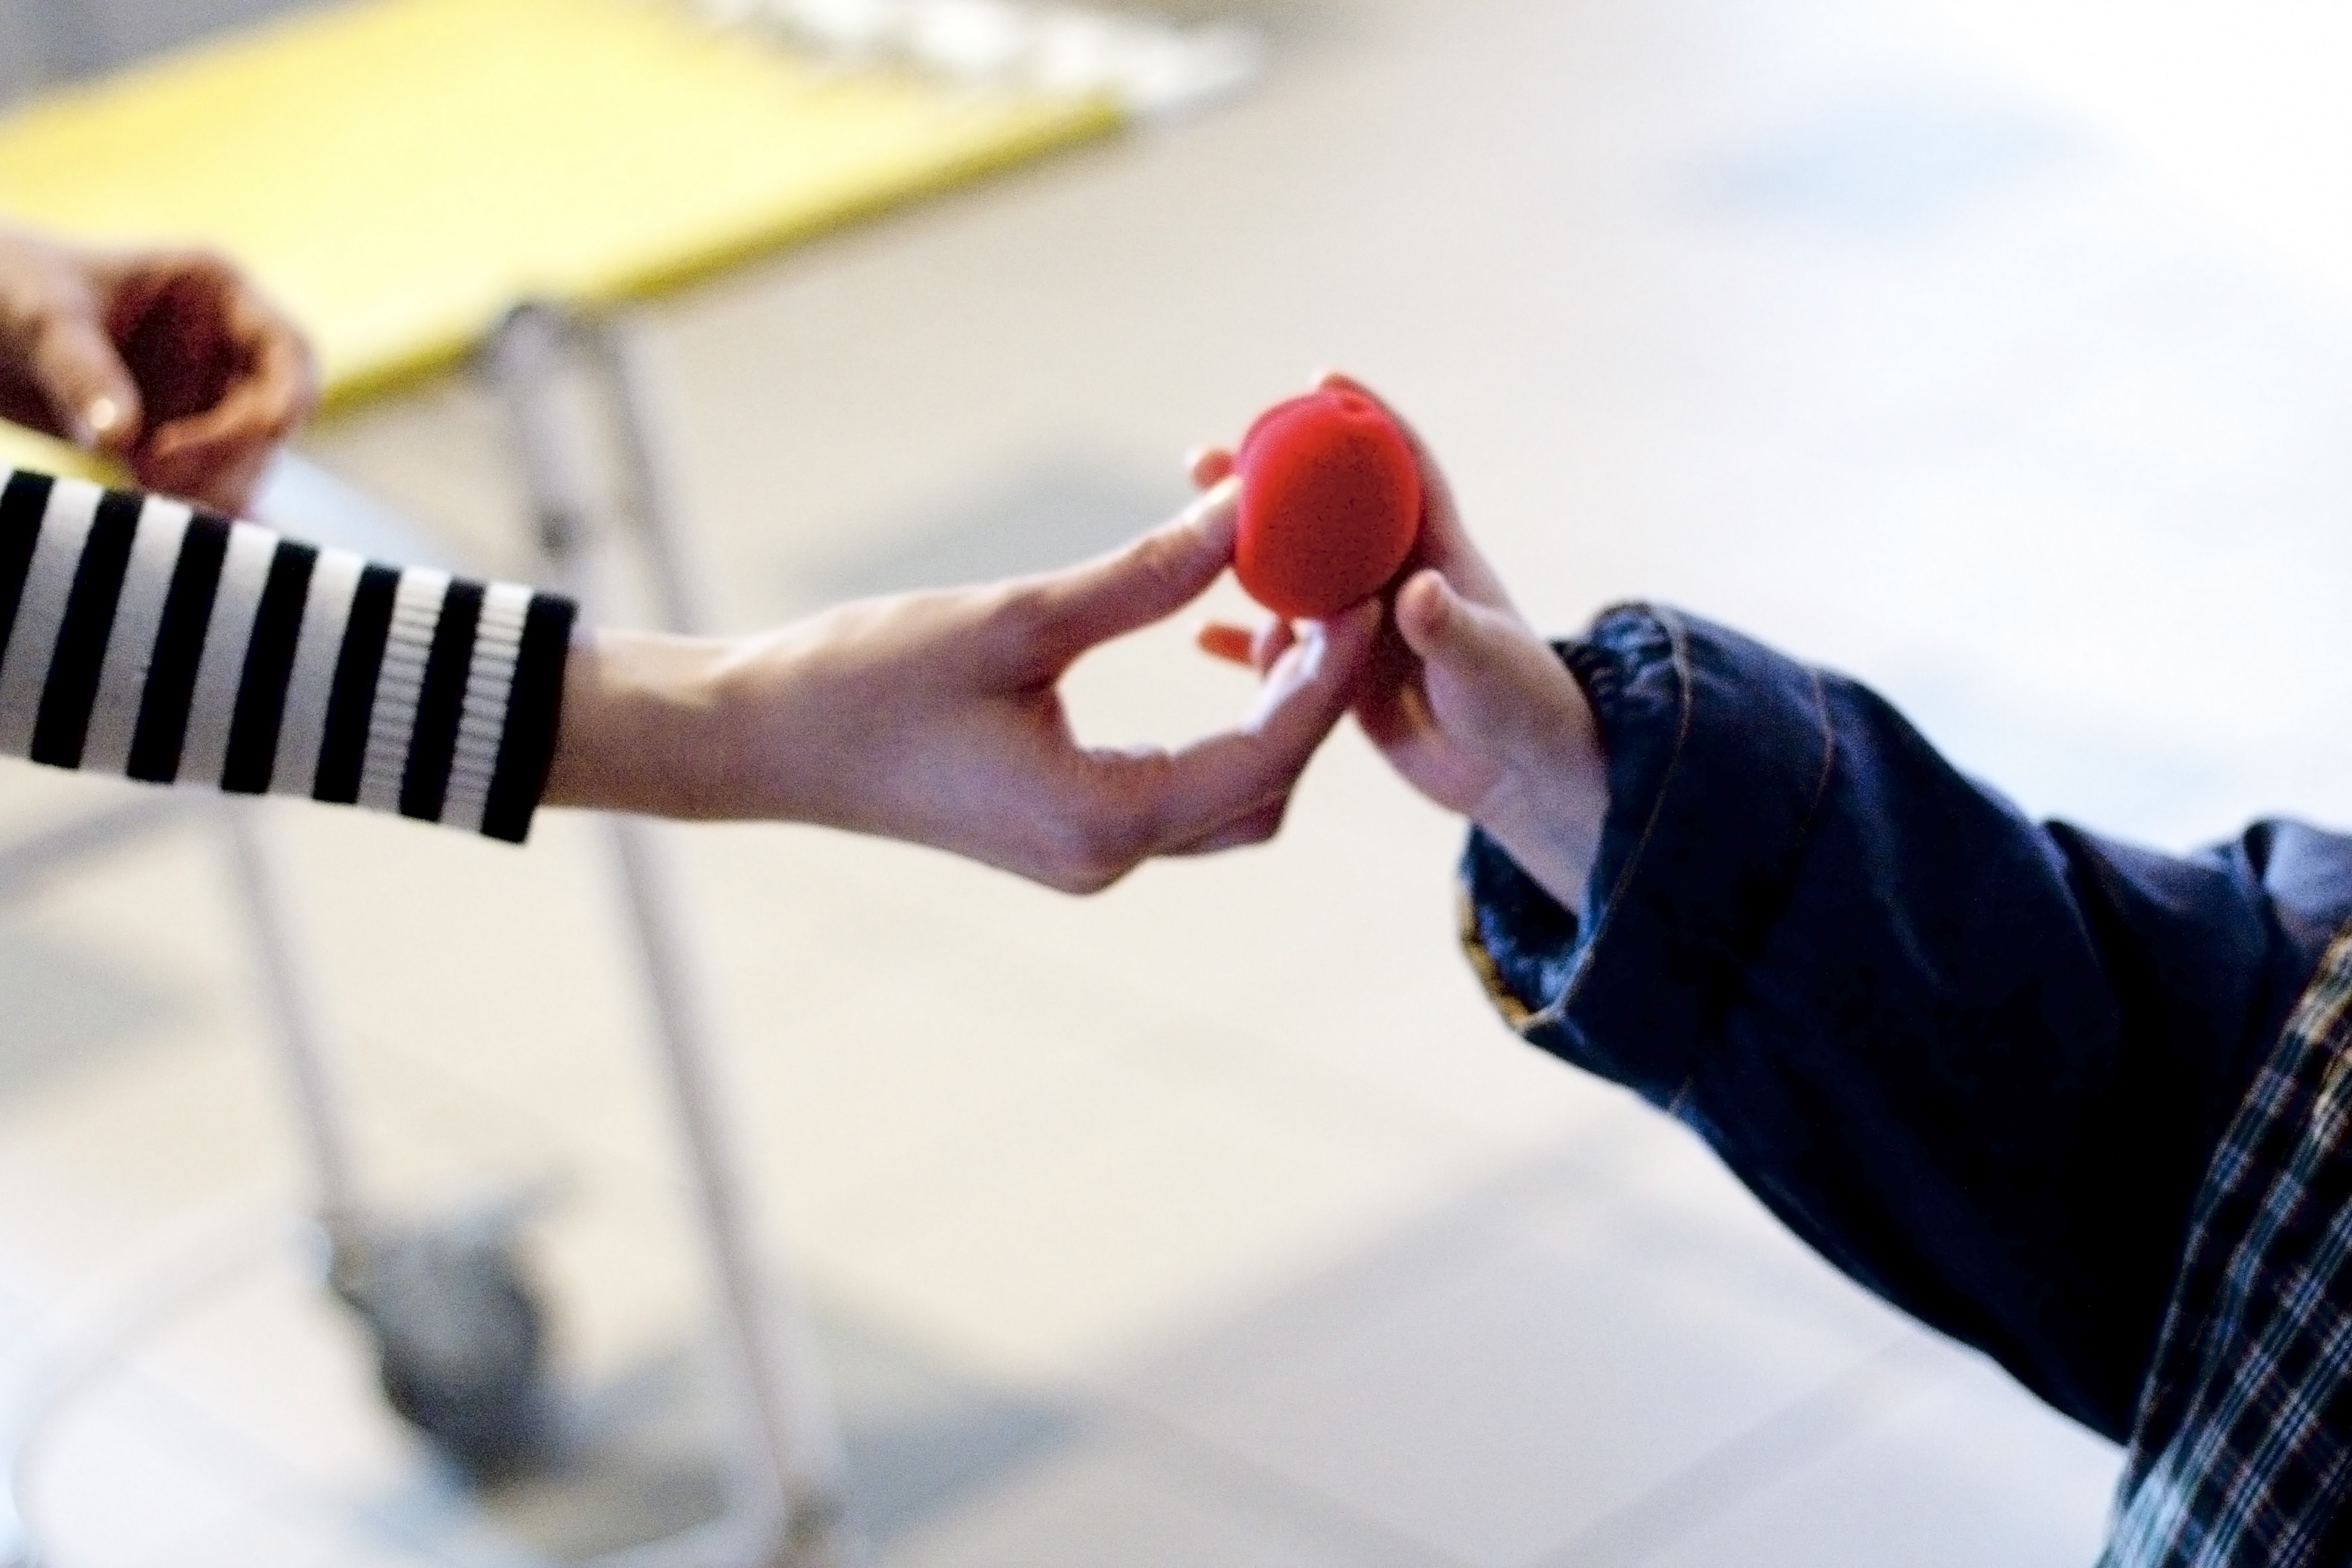 Adult hand giving red nose to child hand